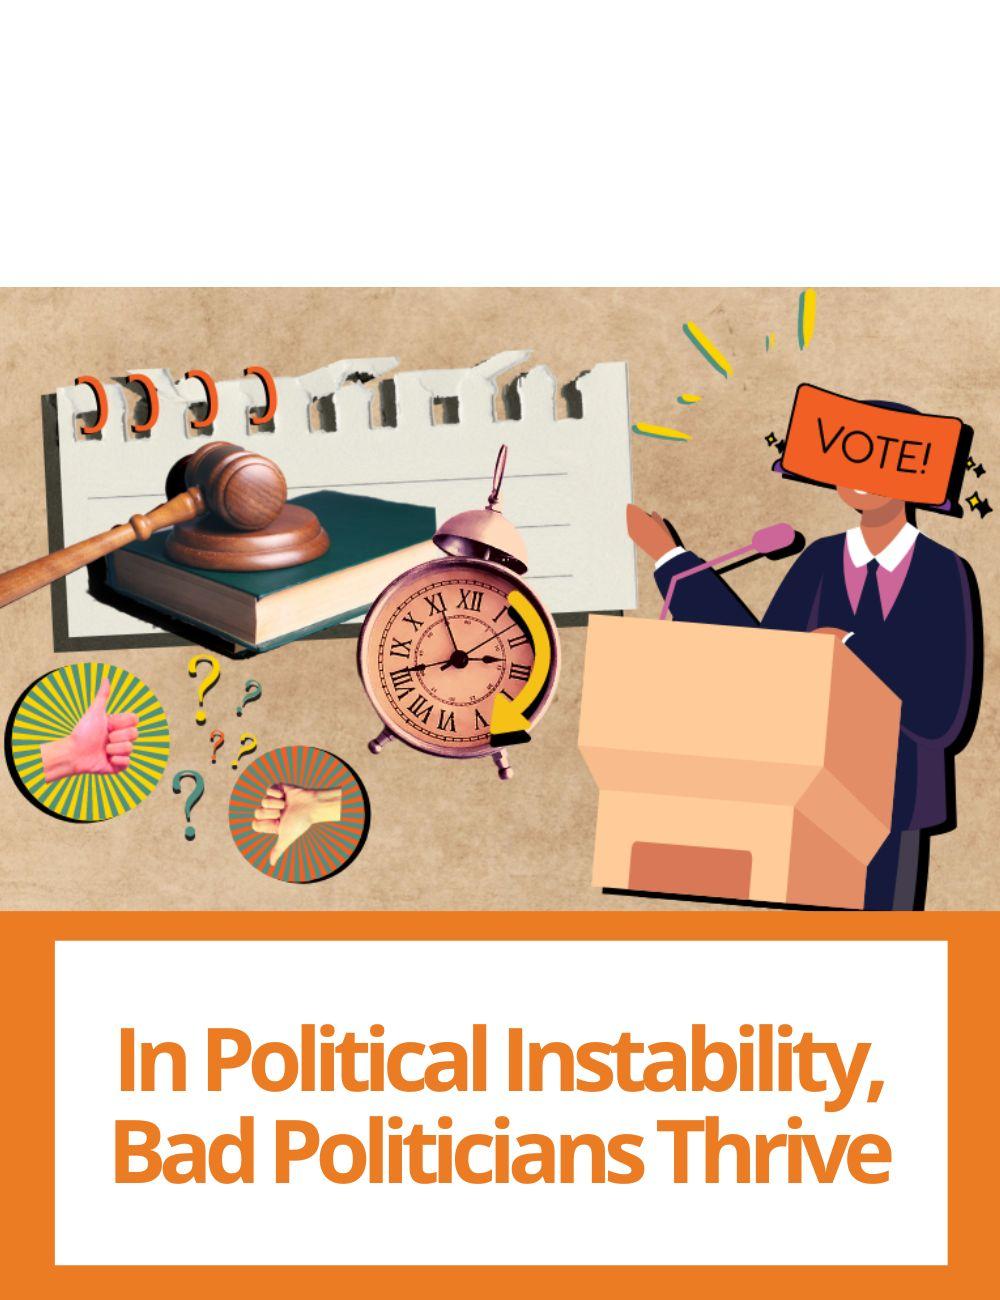 Link to related stories. Image: elements that recall politicians and bureaucracy. Story headline: In Political Instability, Bad Politicians Thrive